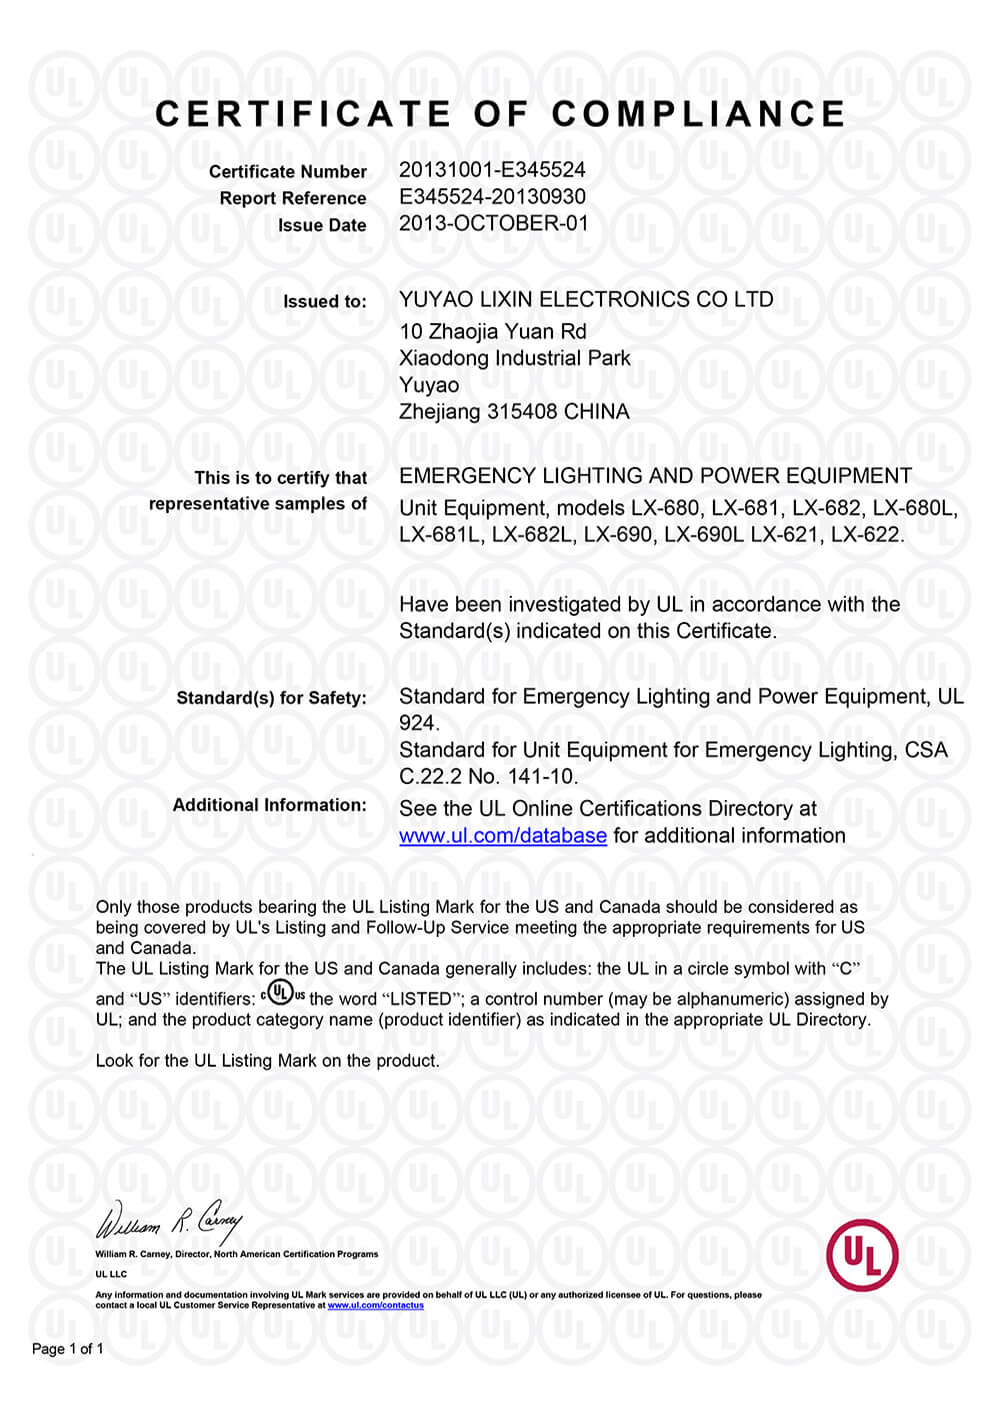 Conventional double-head emergency light UL certificate